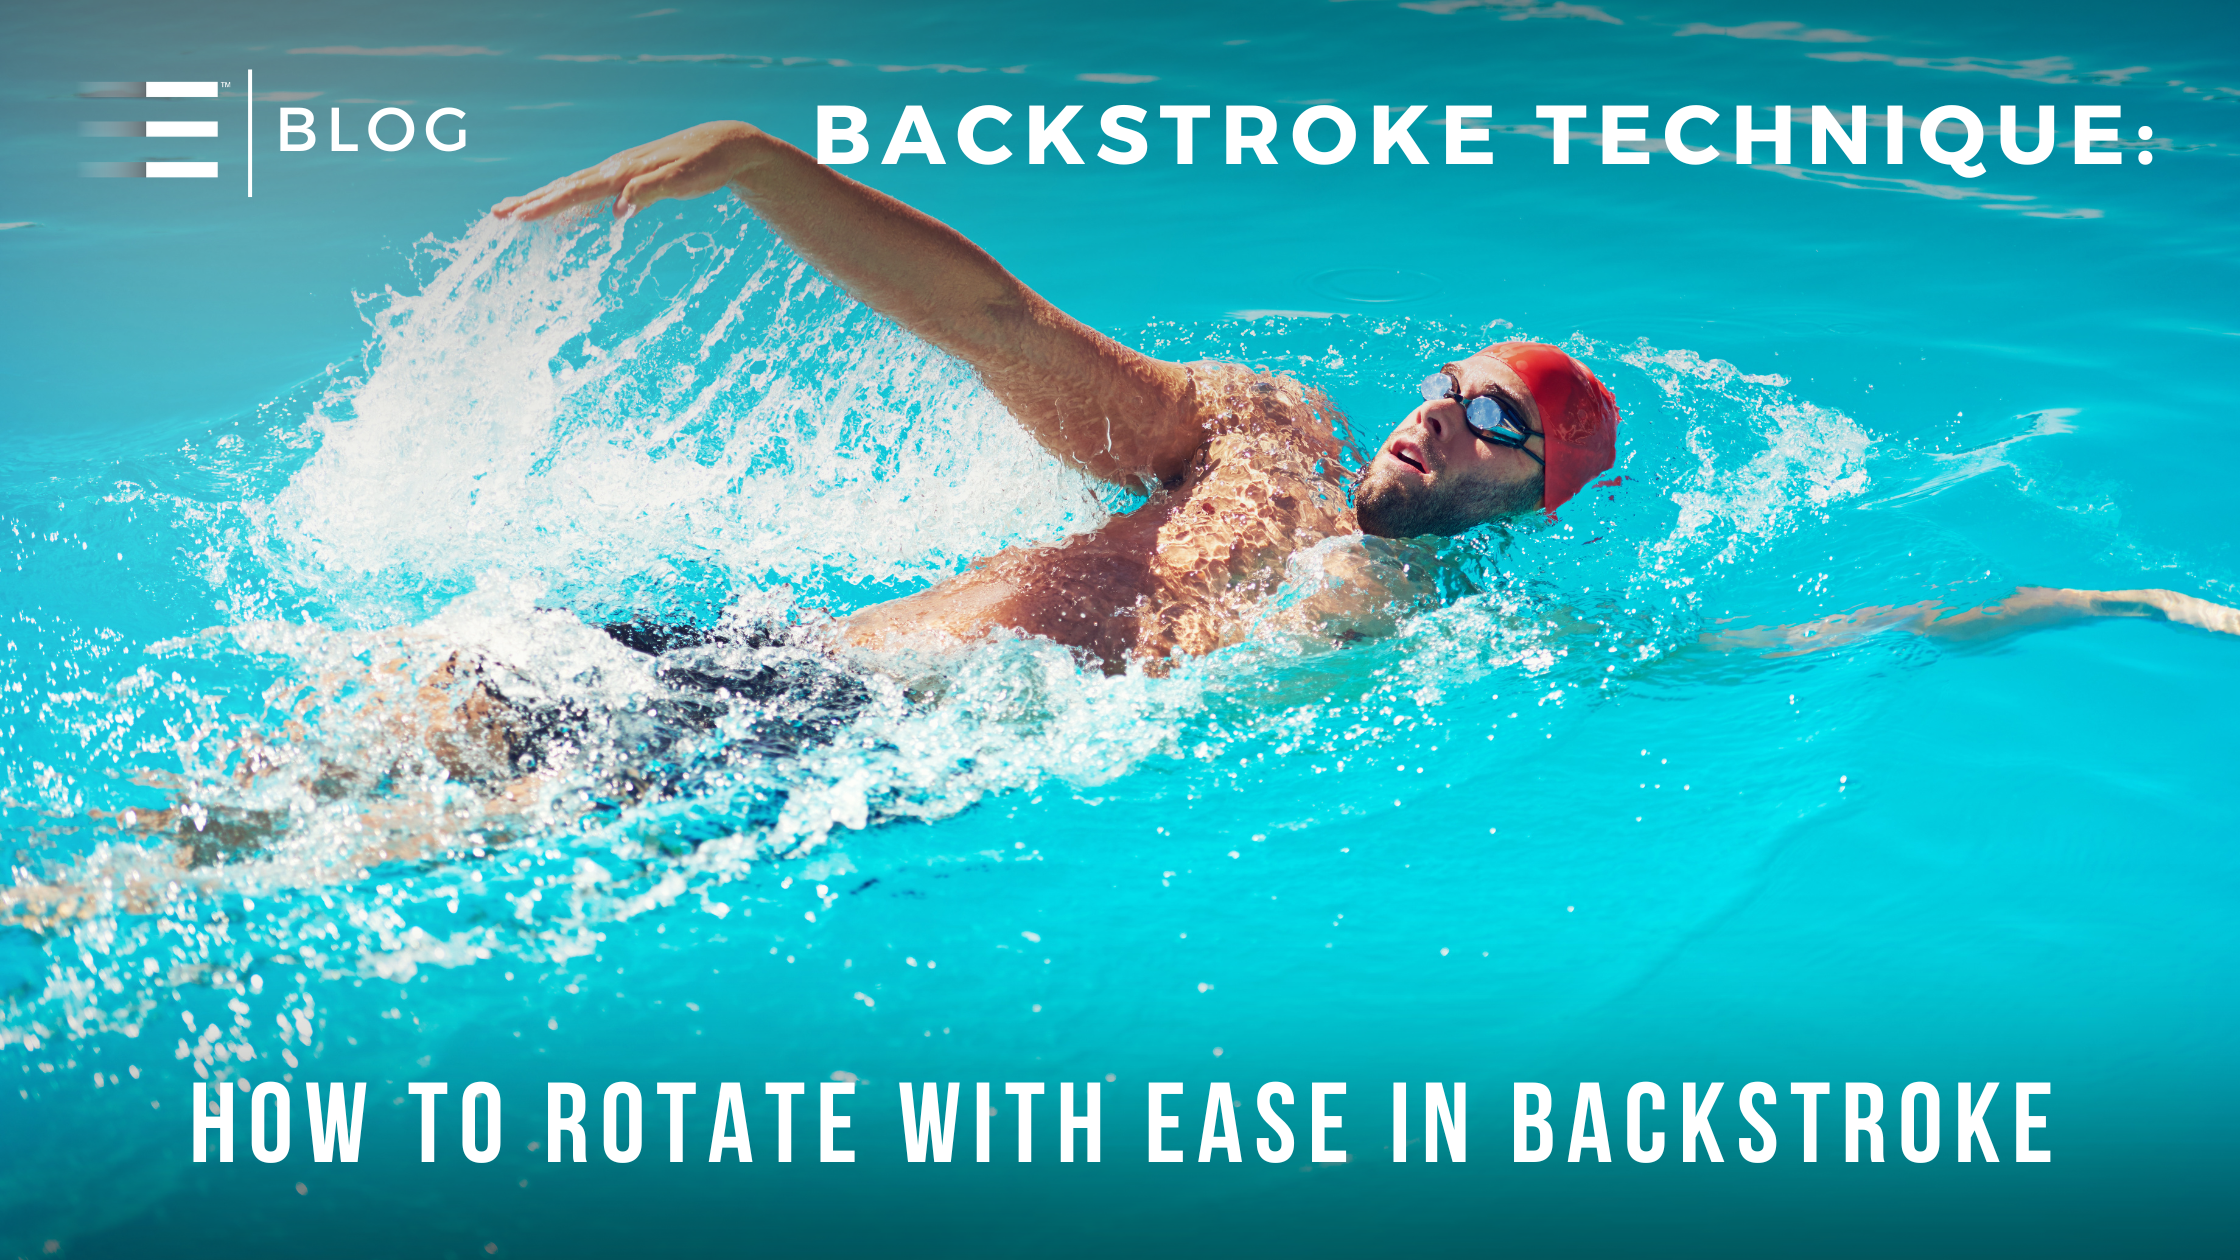 Male swimmer demonstrating backstroke rotation. Learn 'How to Rotate with Ease in Backstroke' with our step-by-step guide for enhanced swimming performance.